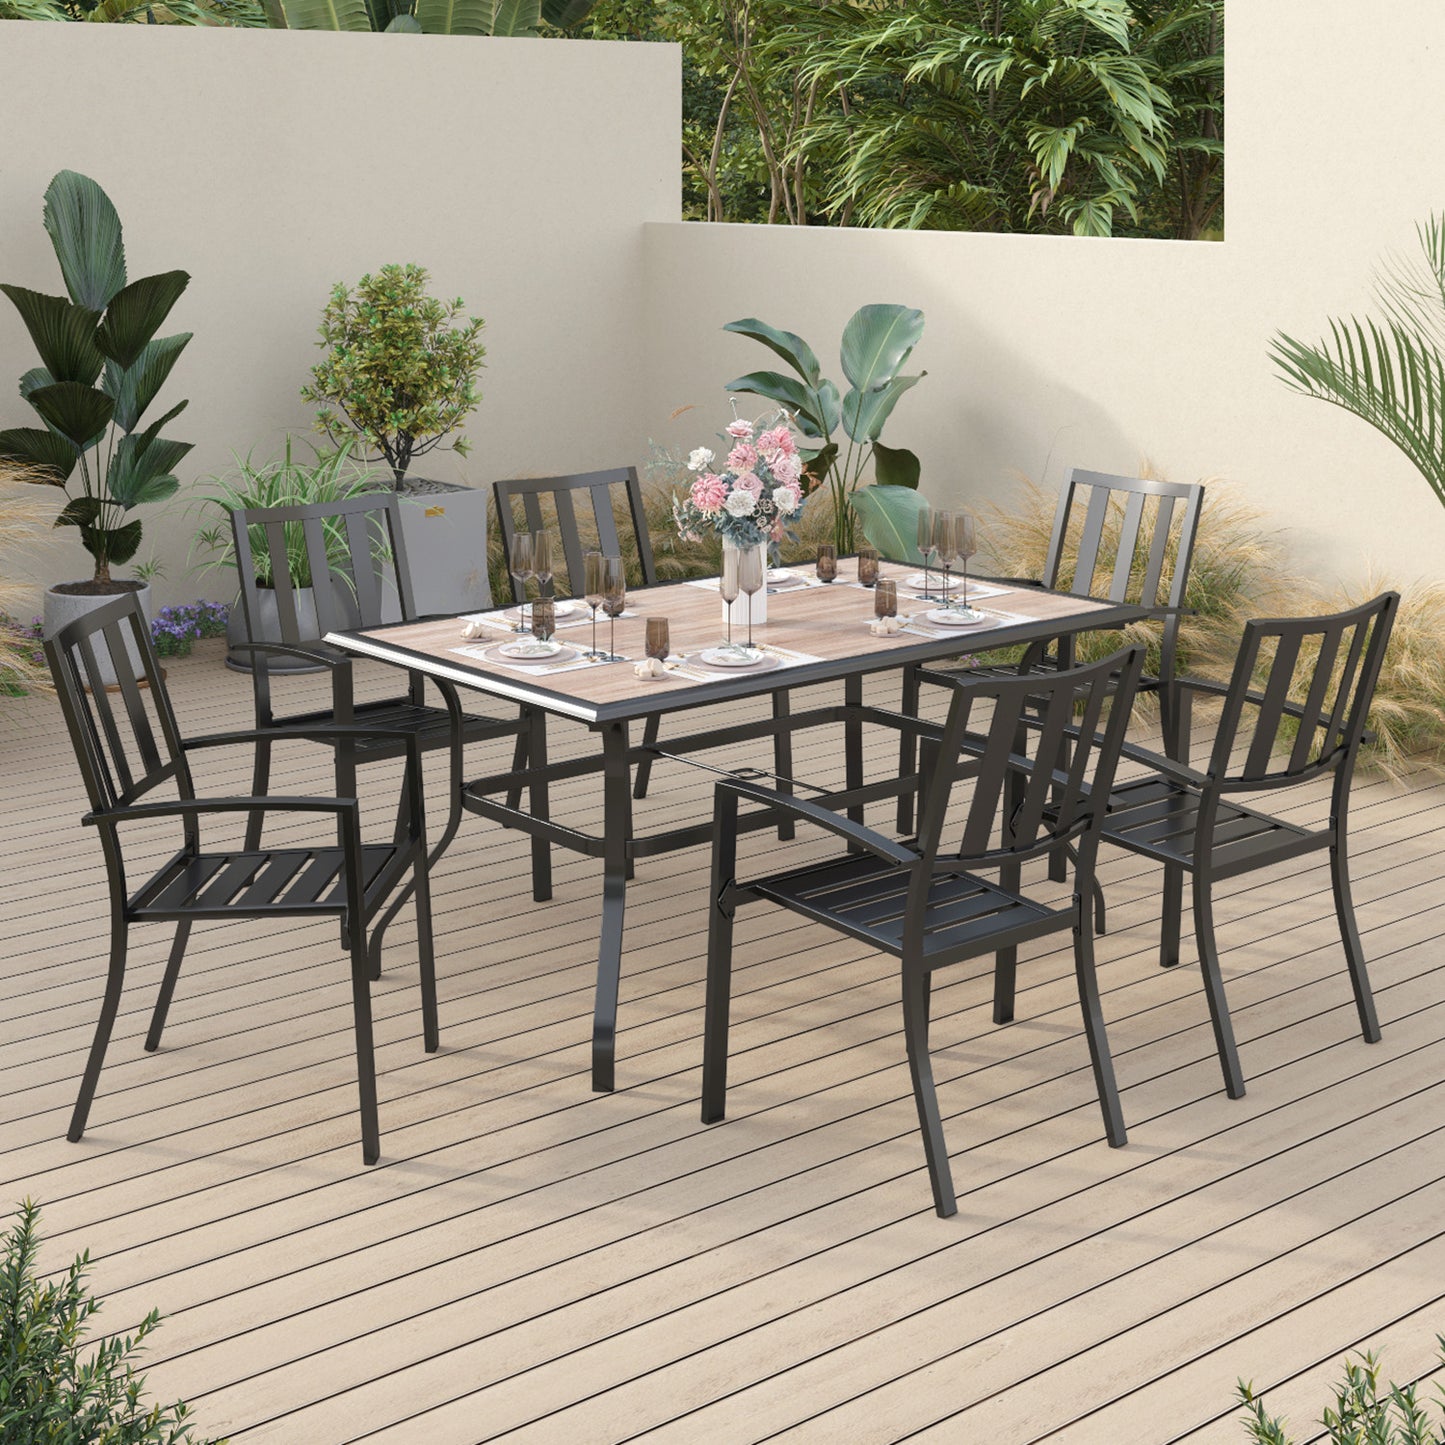 Sophia & William 7 Peices Outdoor Patio Dining Set Metal Chairs and Table Set